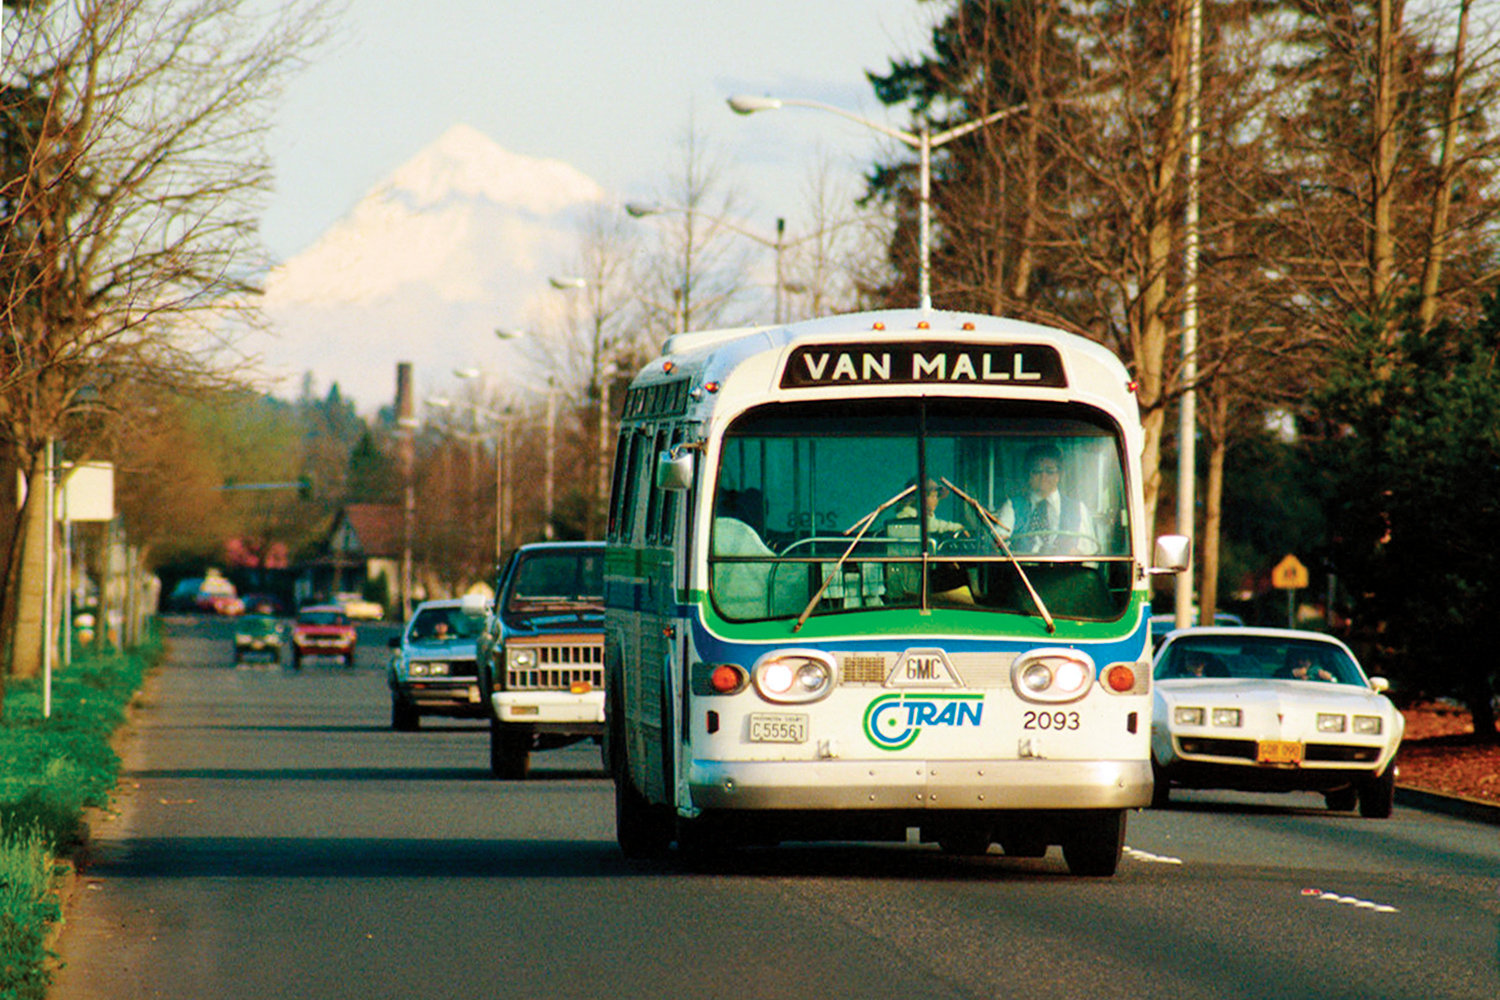 A C-TRAN bus makes its way down the road with Mt. Hood in the background during the system’s first few years in the 1980s.